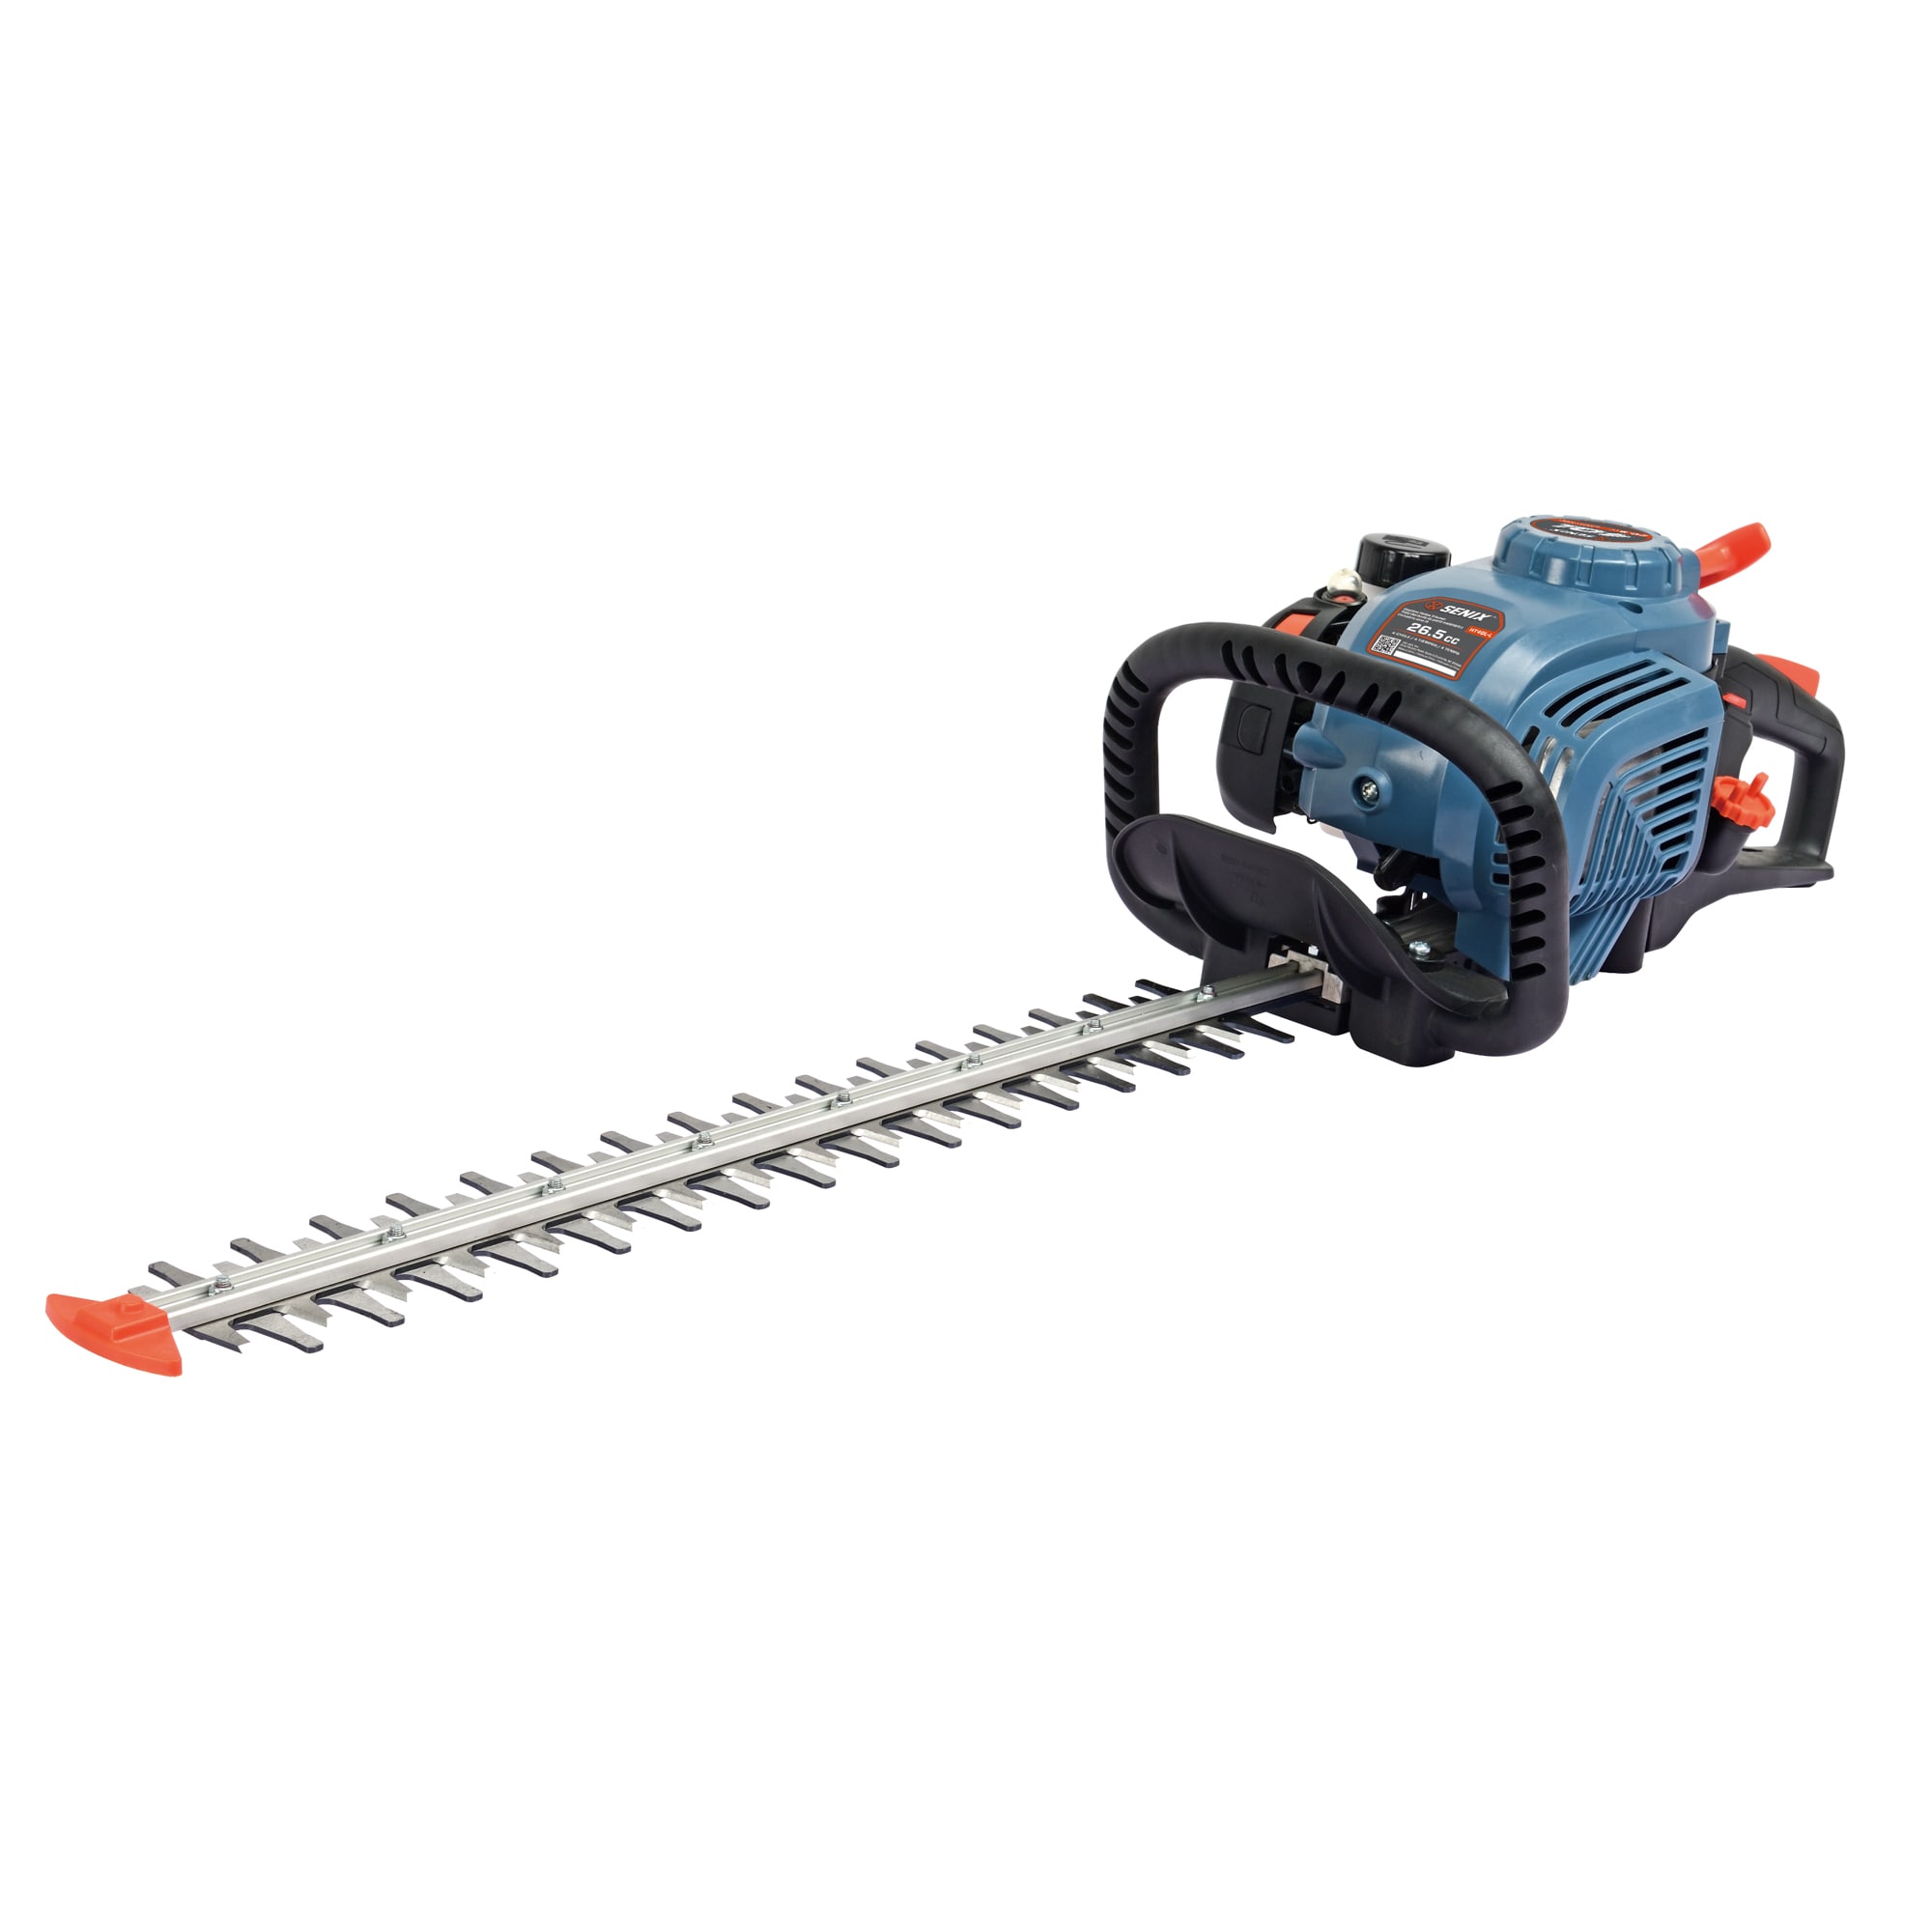 Kitcheniva Gas Powered Hedge Trimmer Double Sided Blade 24, 1 Pcs - Kroger